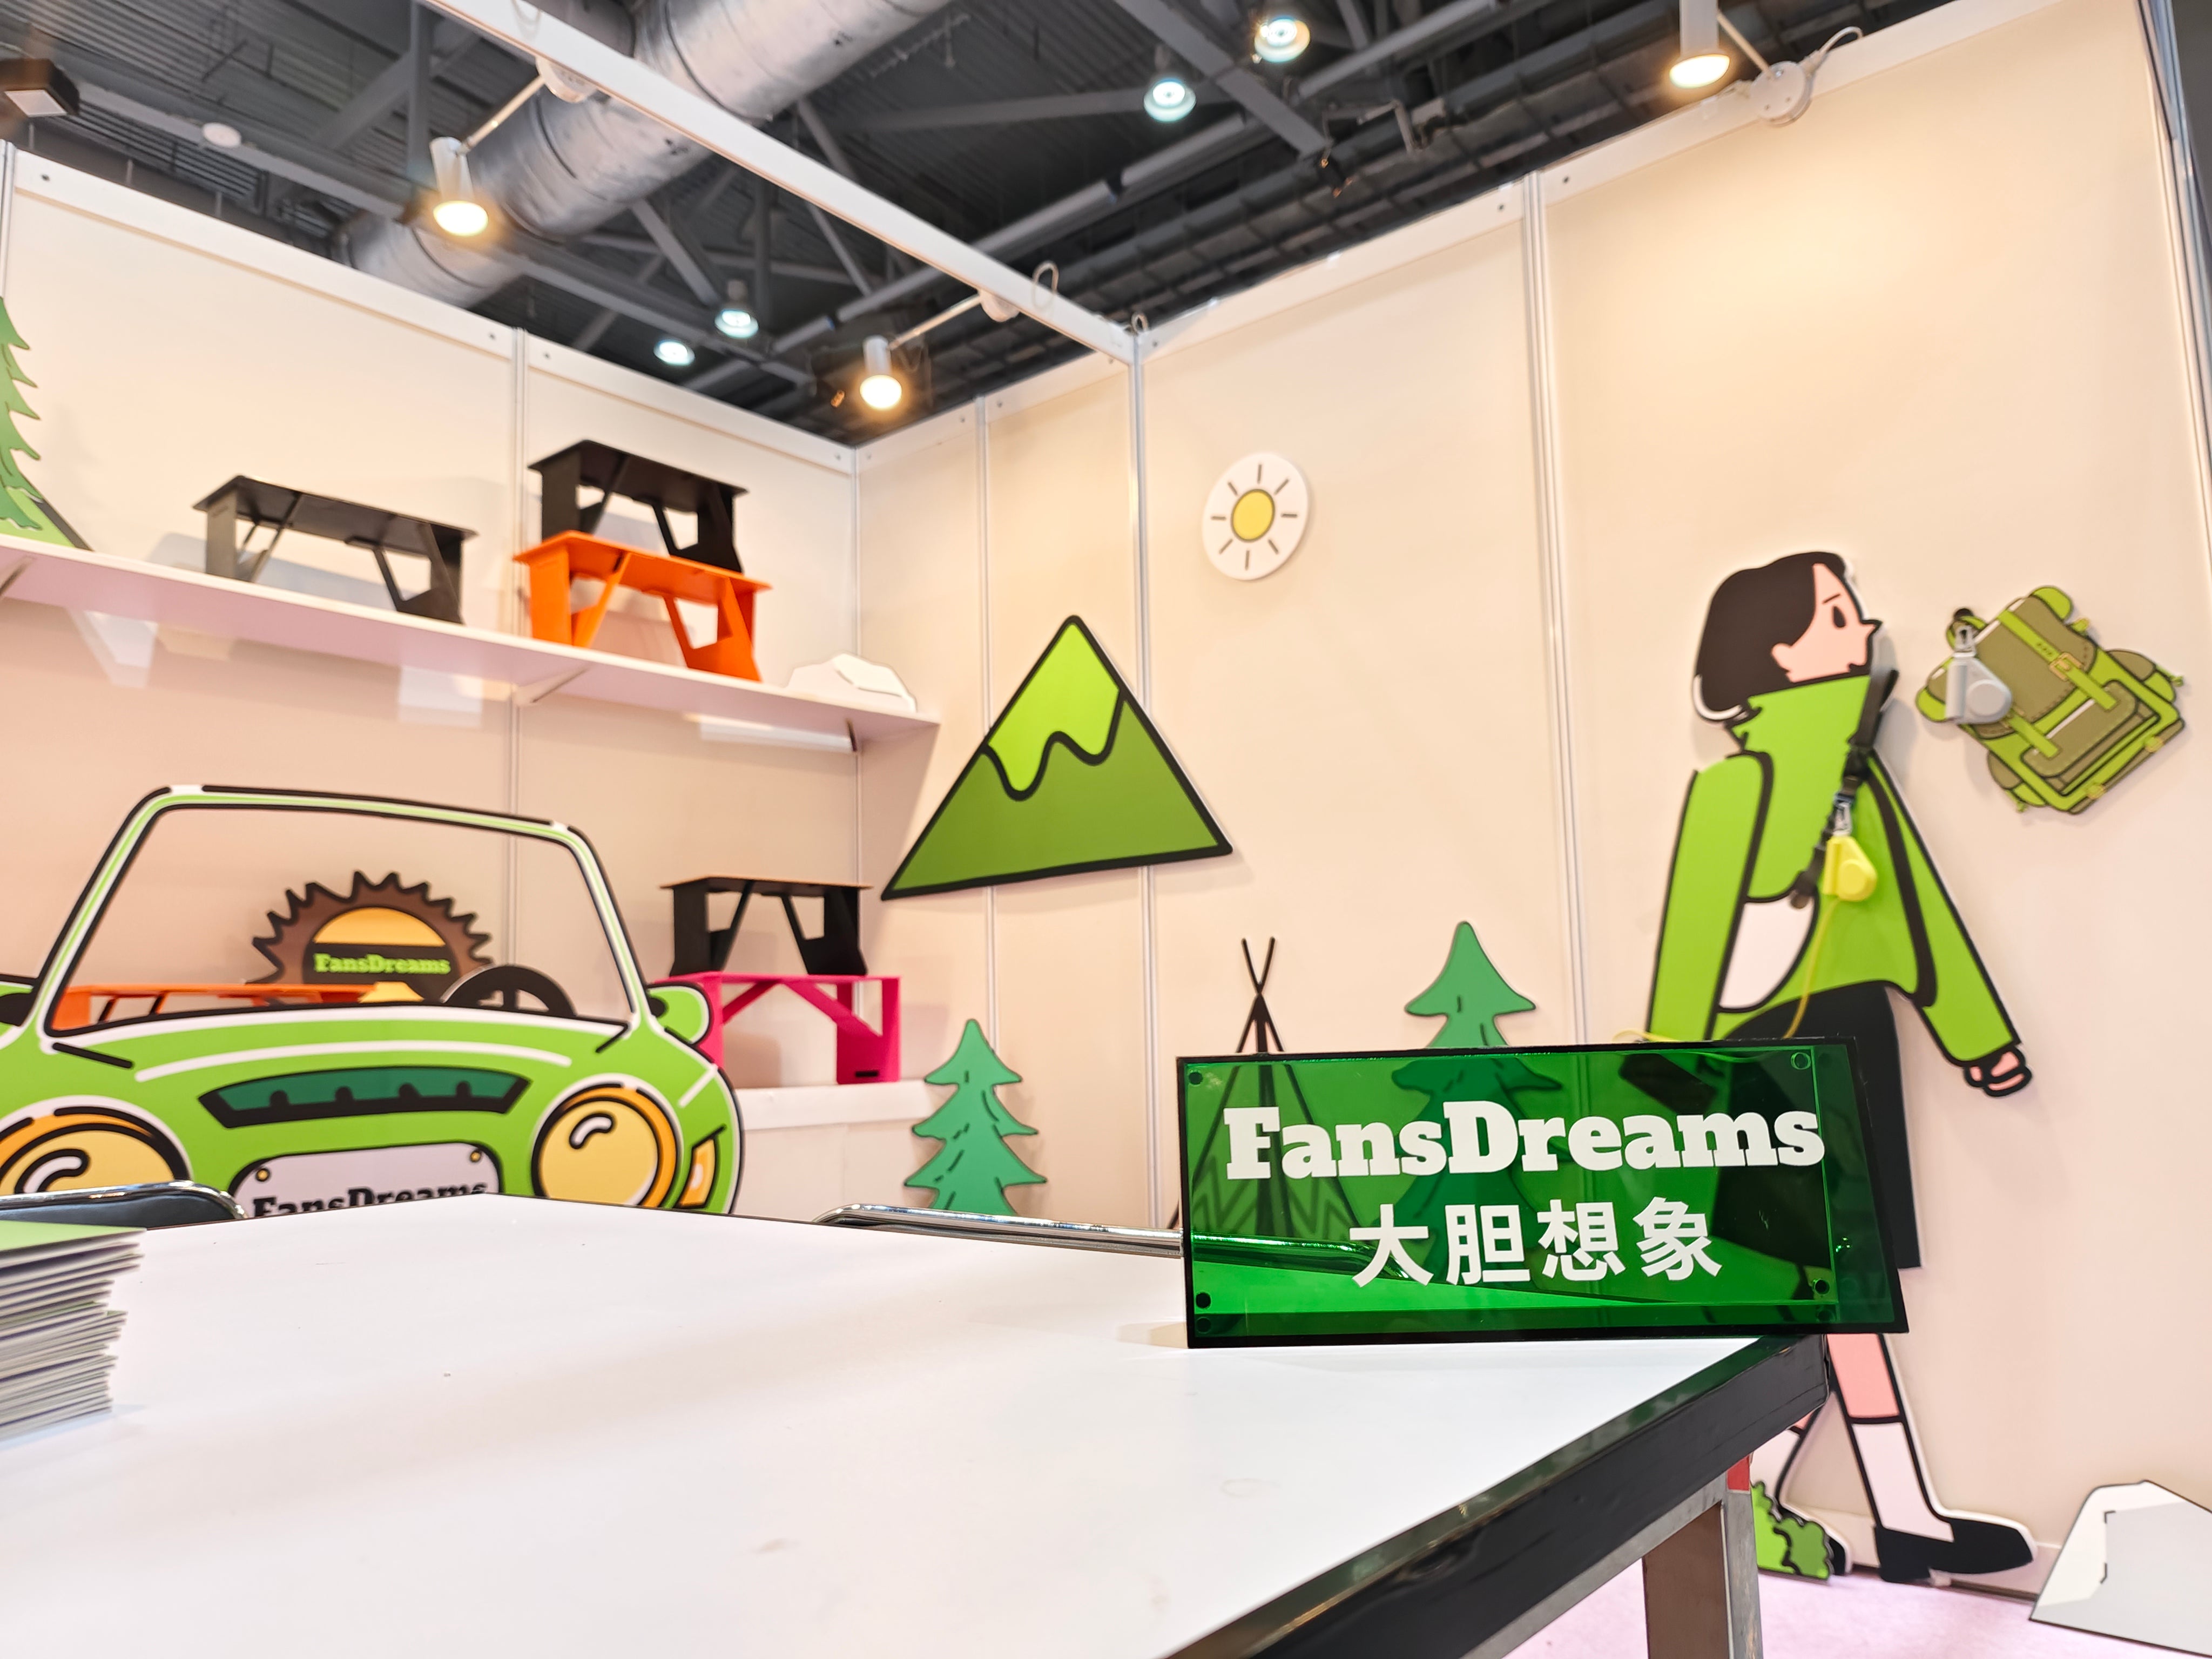 FansDreams in HK Global Source Exhibition